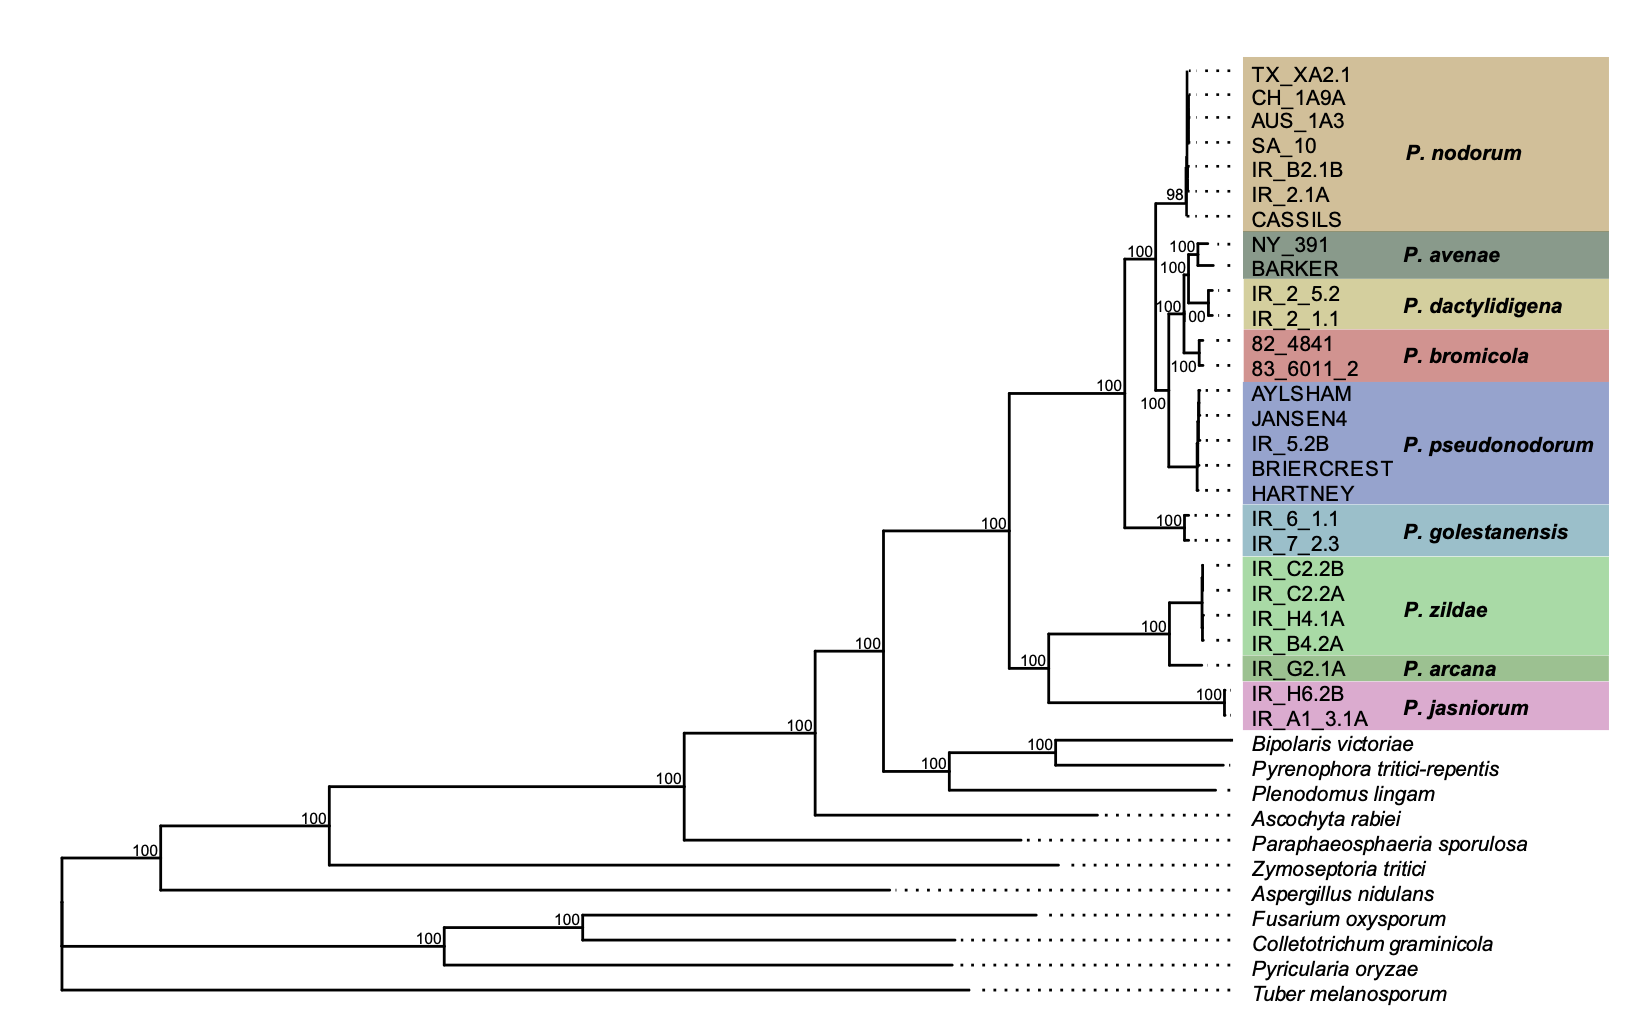 Genome-scale phylogenies reveal relationships among Parastagonospora species infecting domesticated and wild grasses